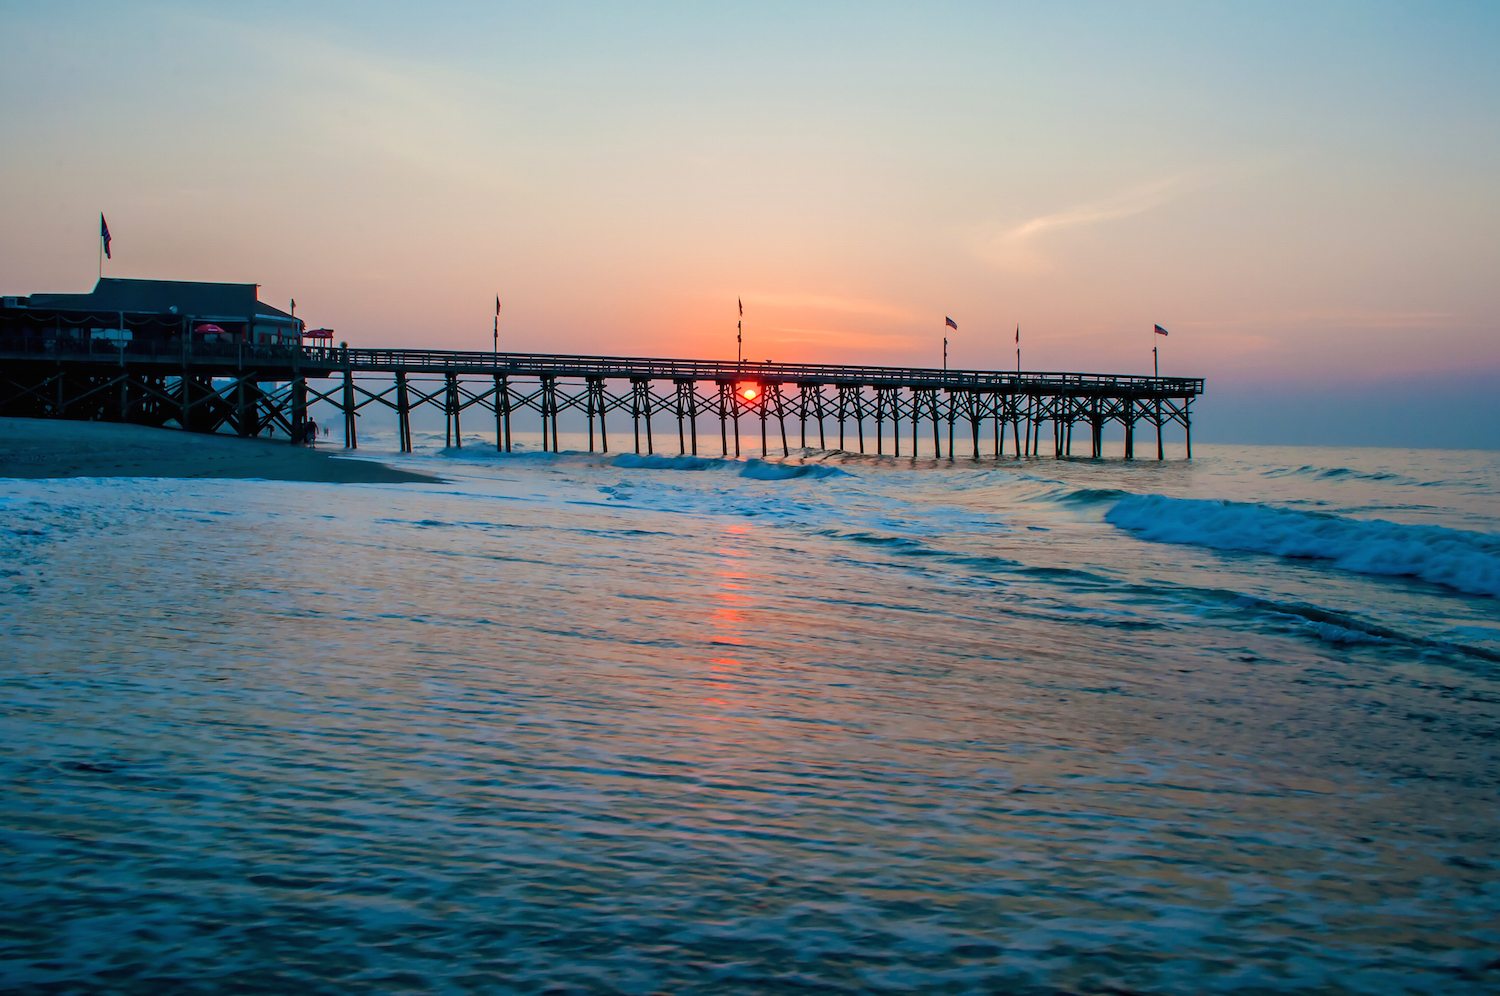 10 Things to See and Do in Myrtle Beach, SC